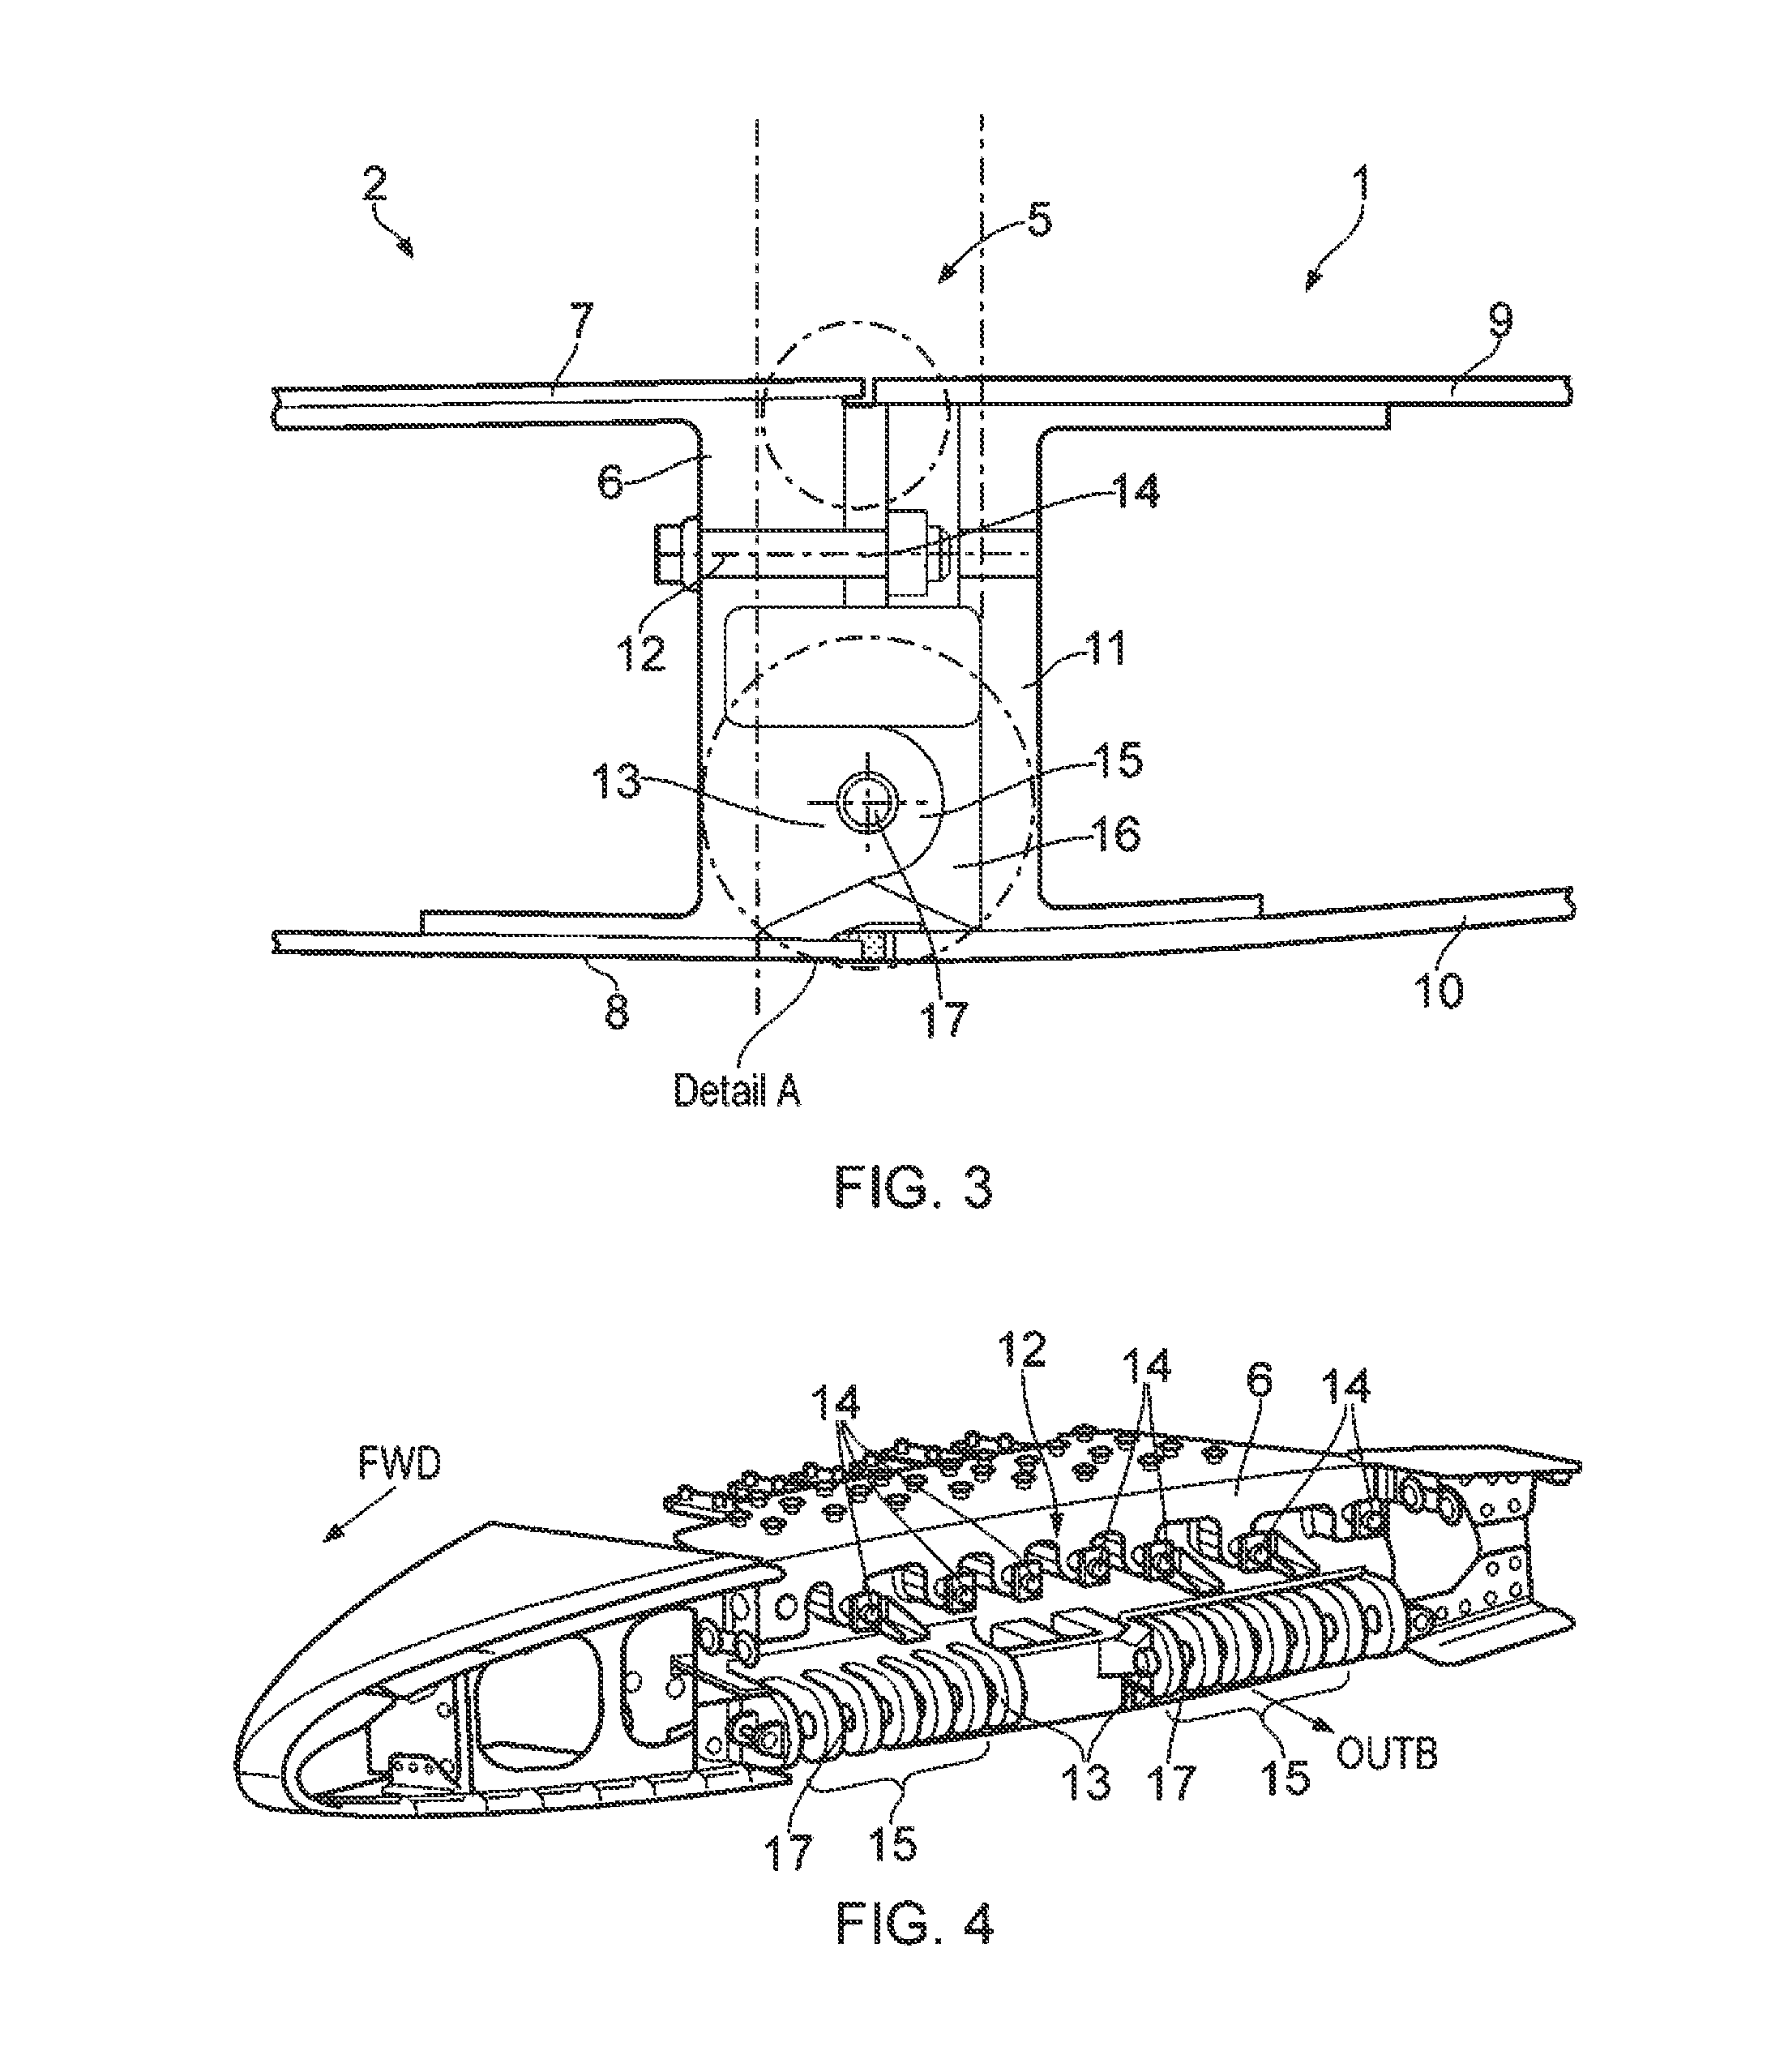 Aircraft wing with wing tip device